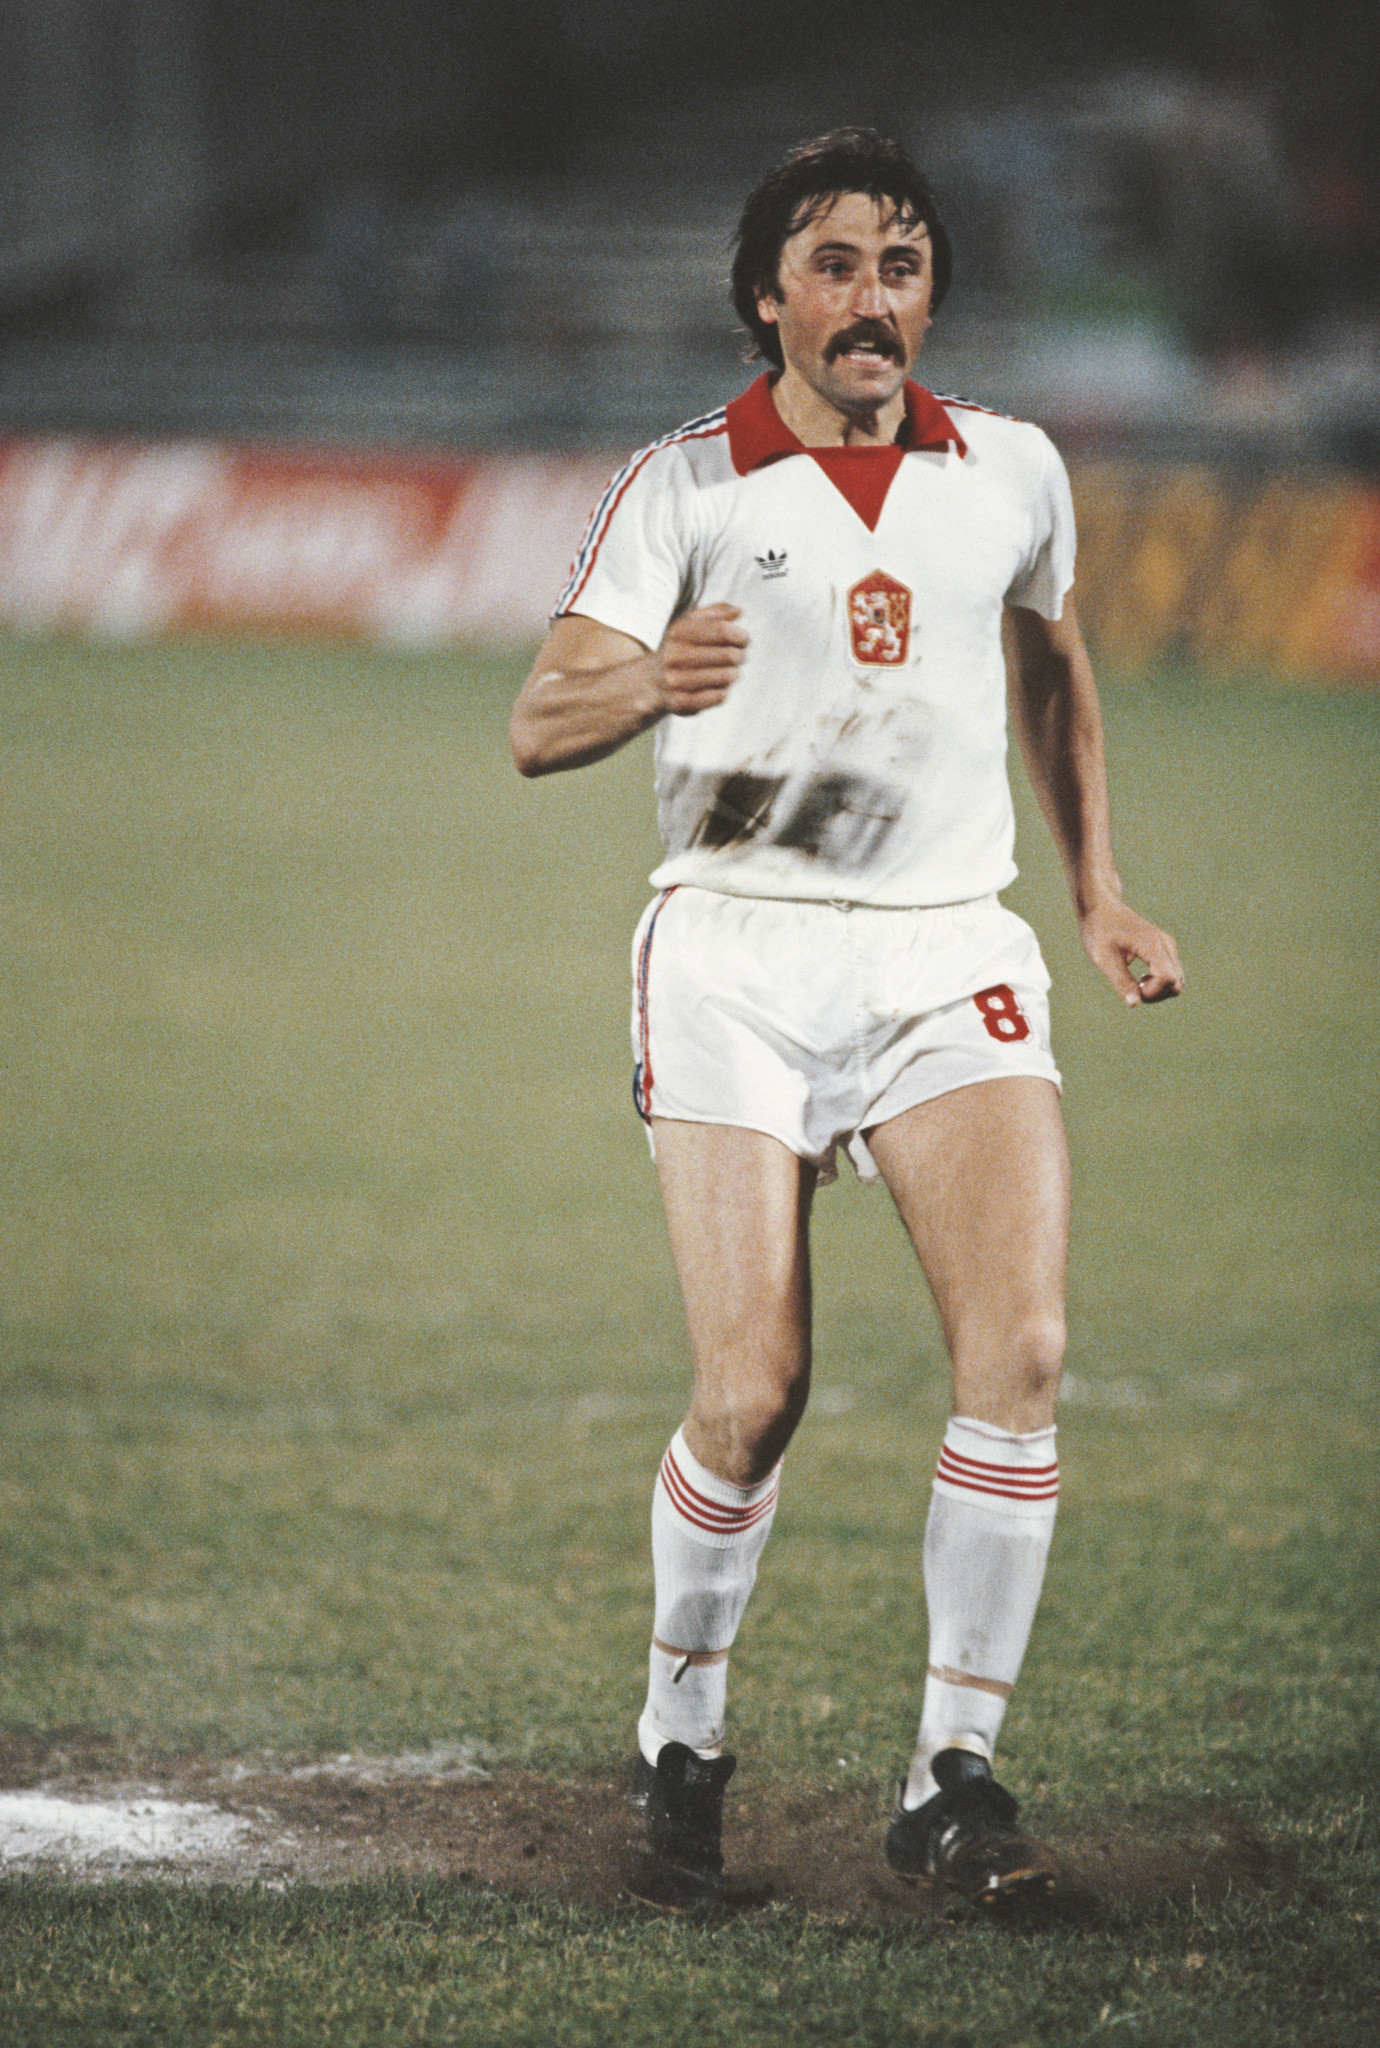 Antonin Panenka was famous for his chipped penalty kicks, which have become known as 